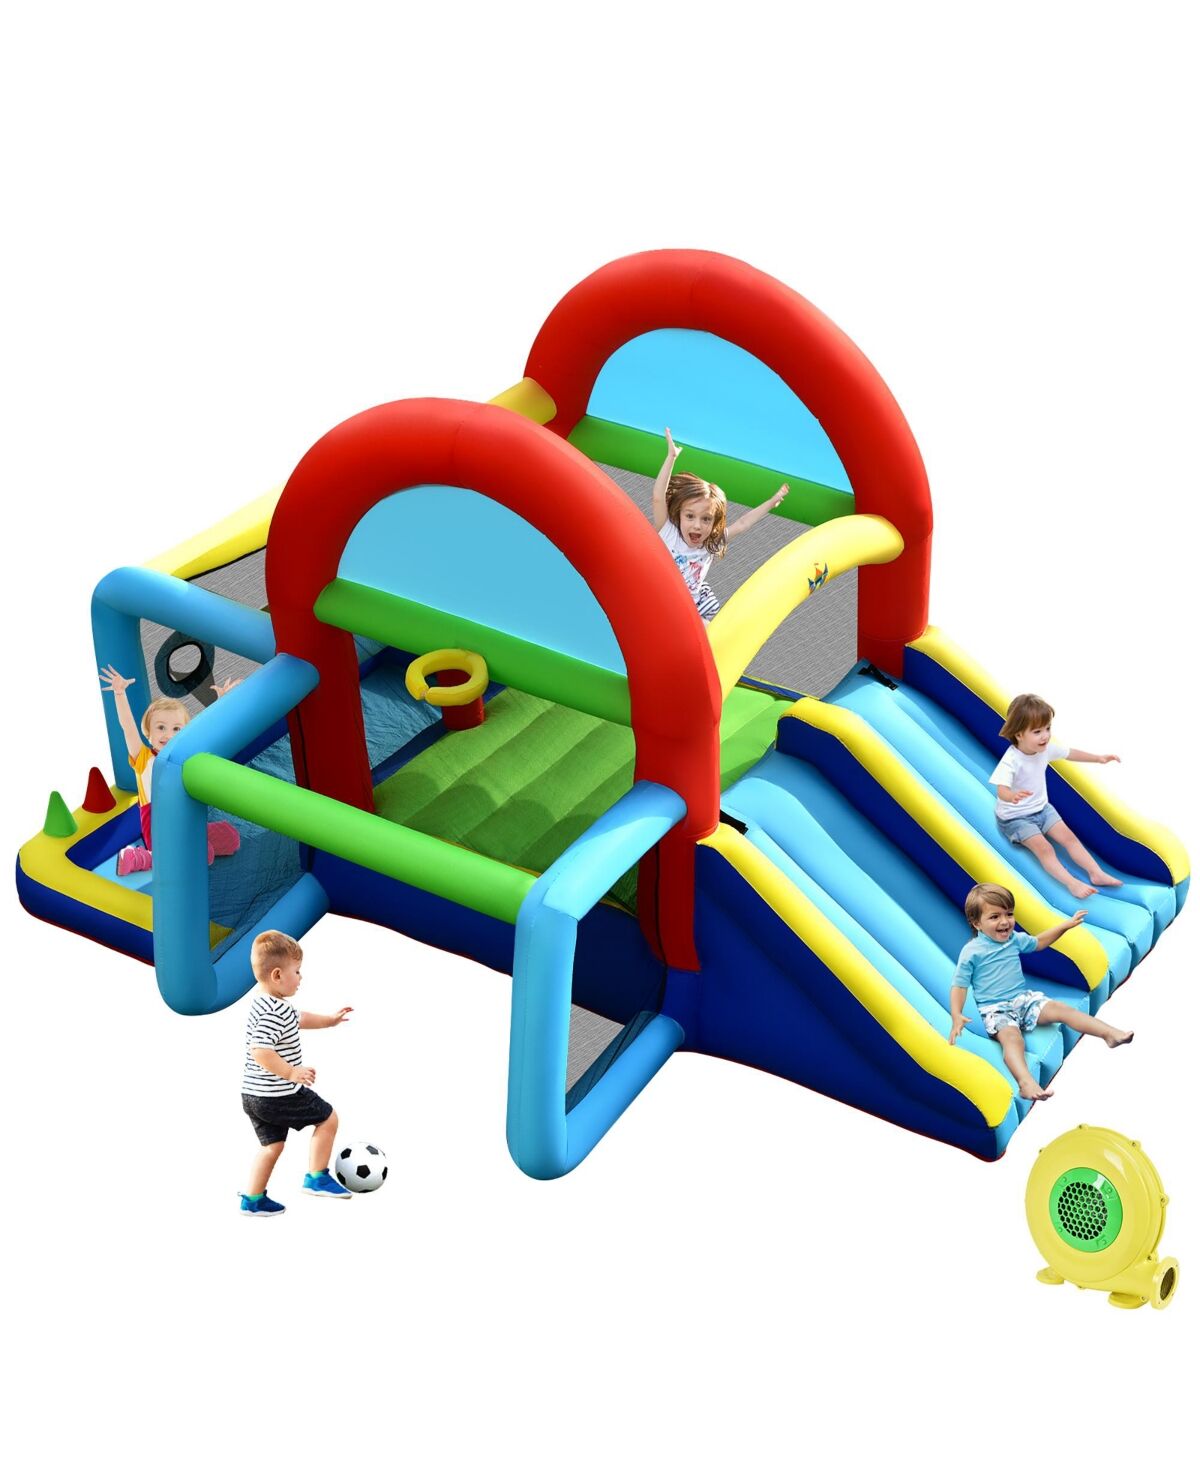 Costway Inflatable Bounce House Kids Bouncy Jumping Castle w/ Dual Slides & 480W Blower - Blue